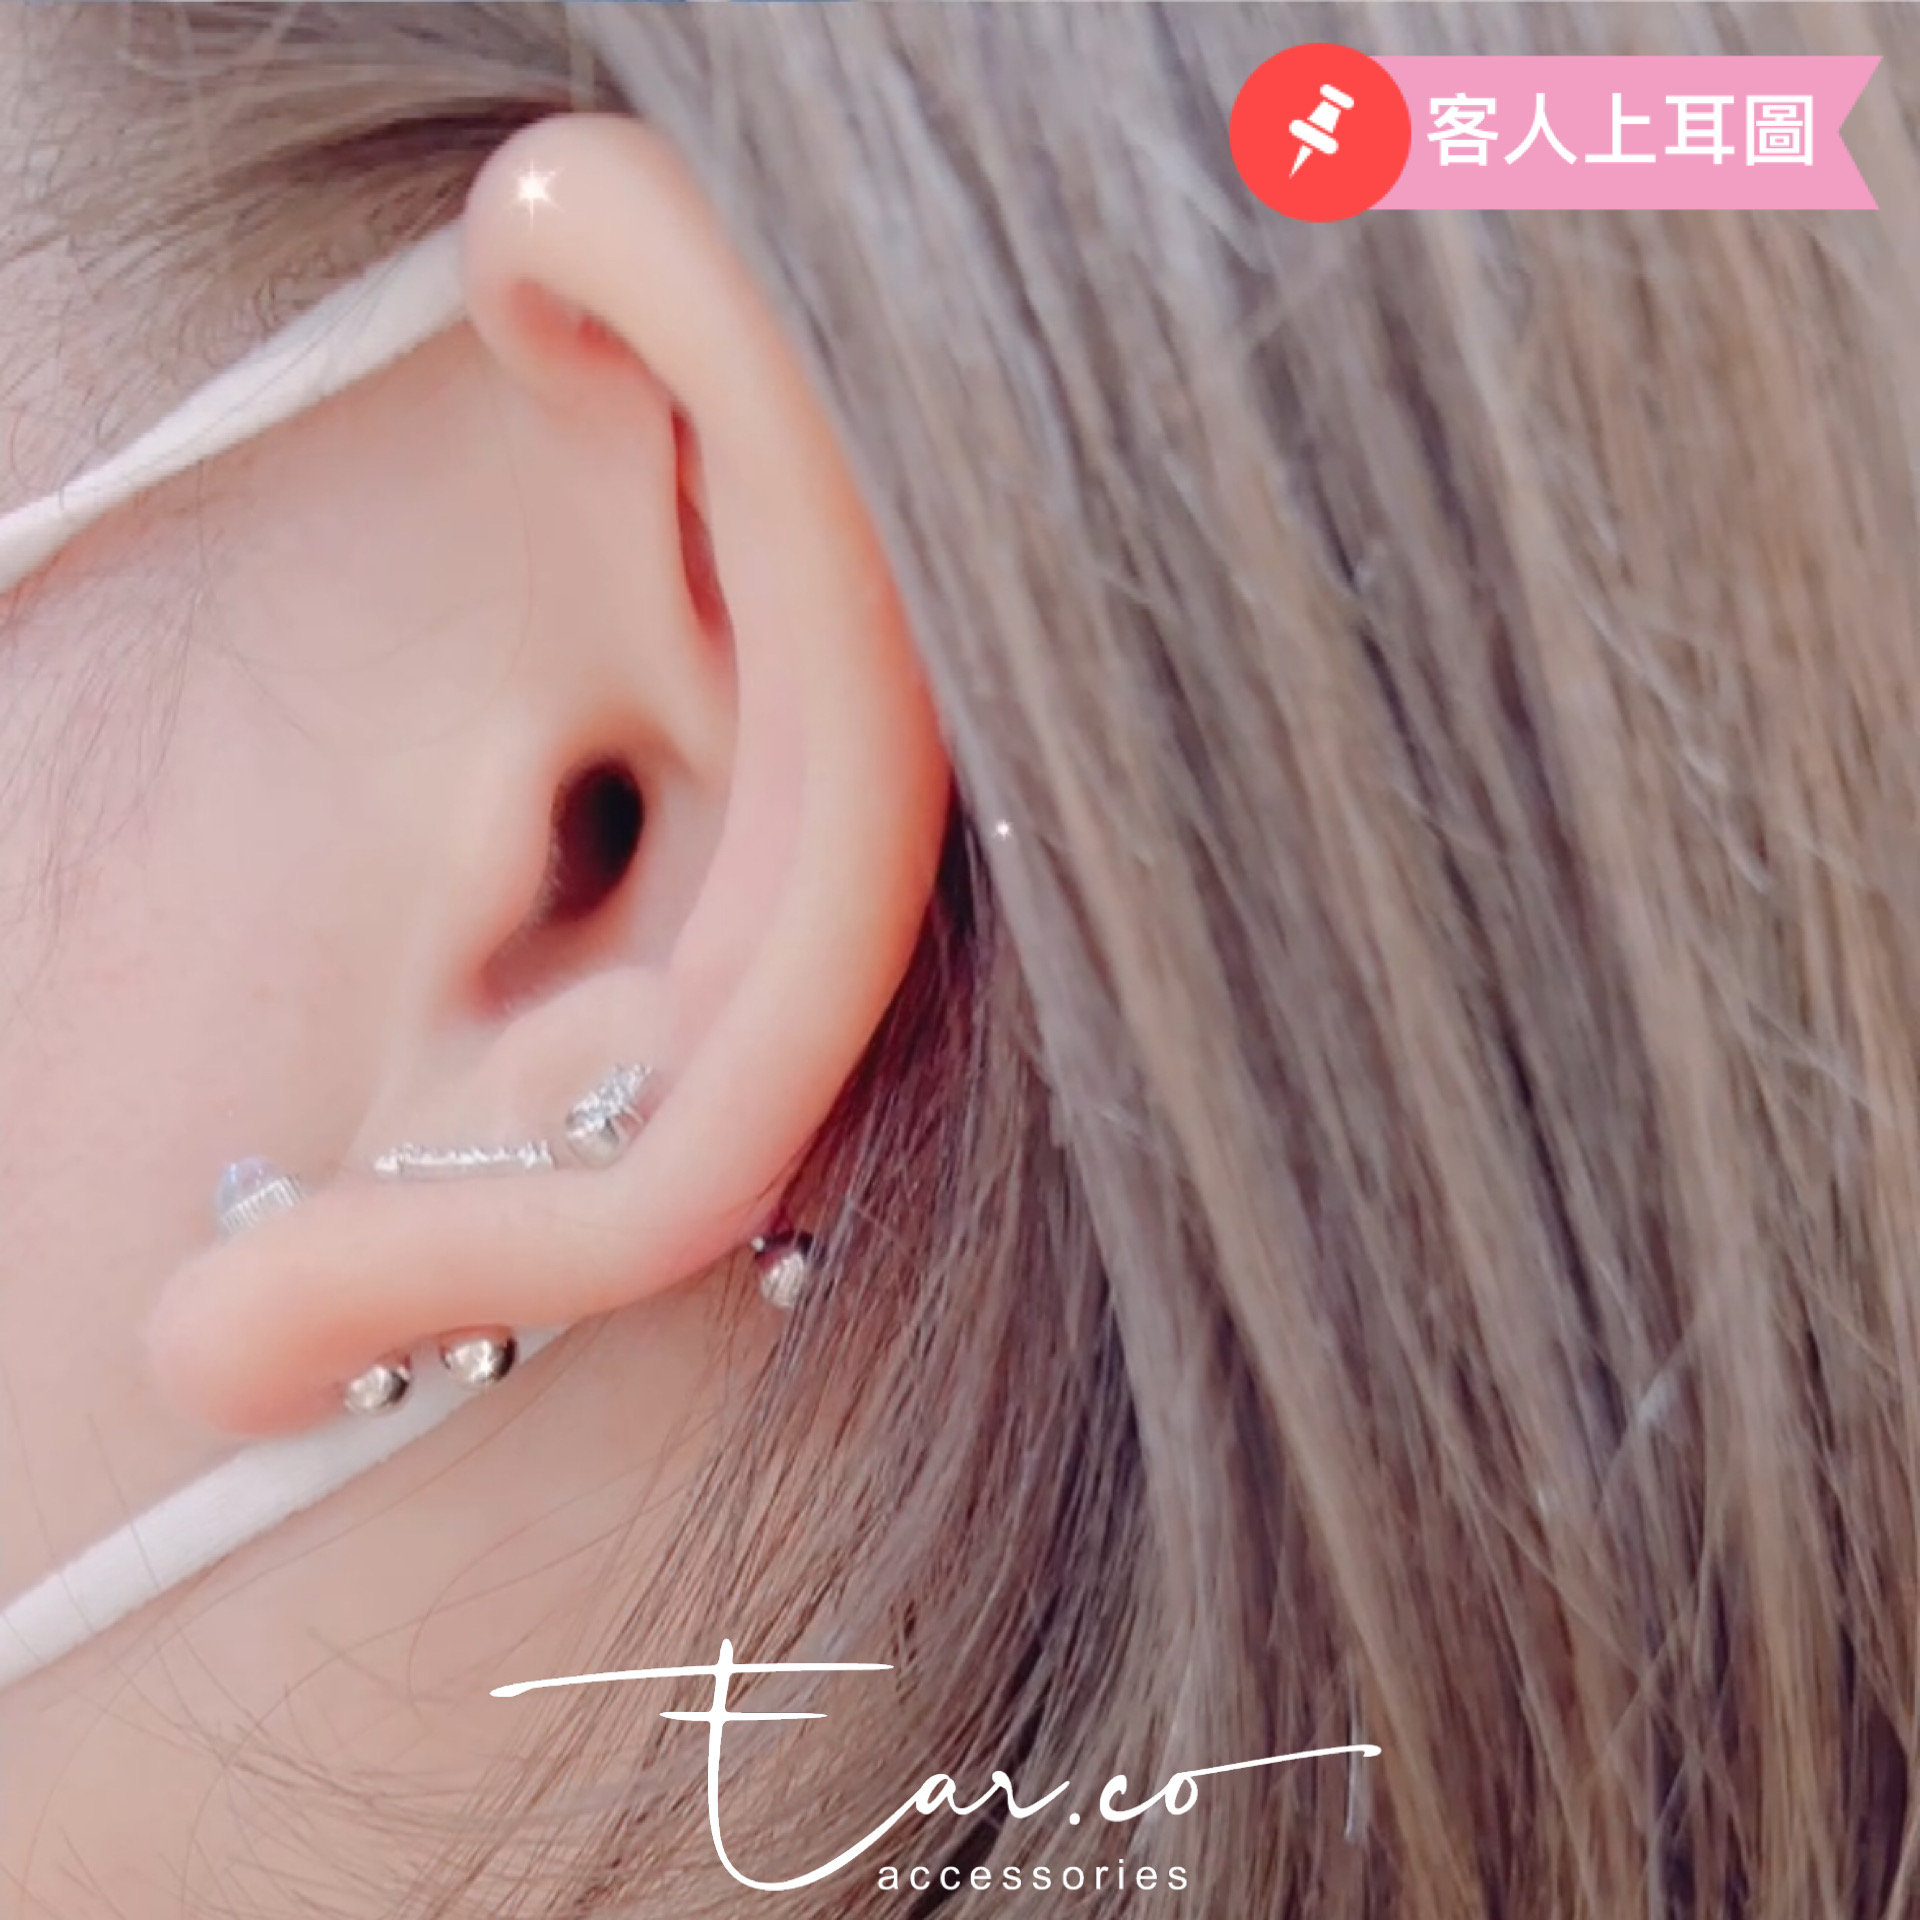 Simple Collection 耳珠/耳骨釘| Ear.co